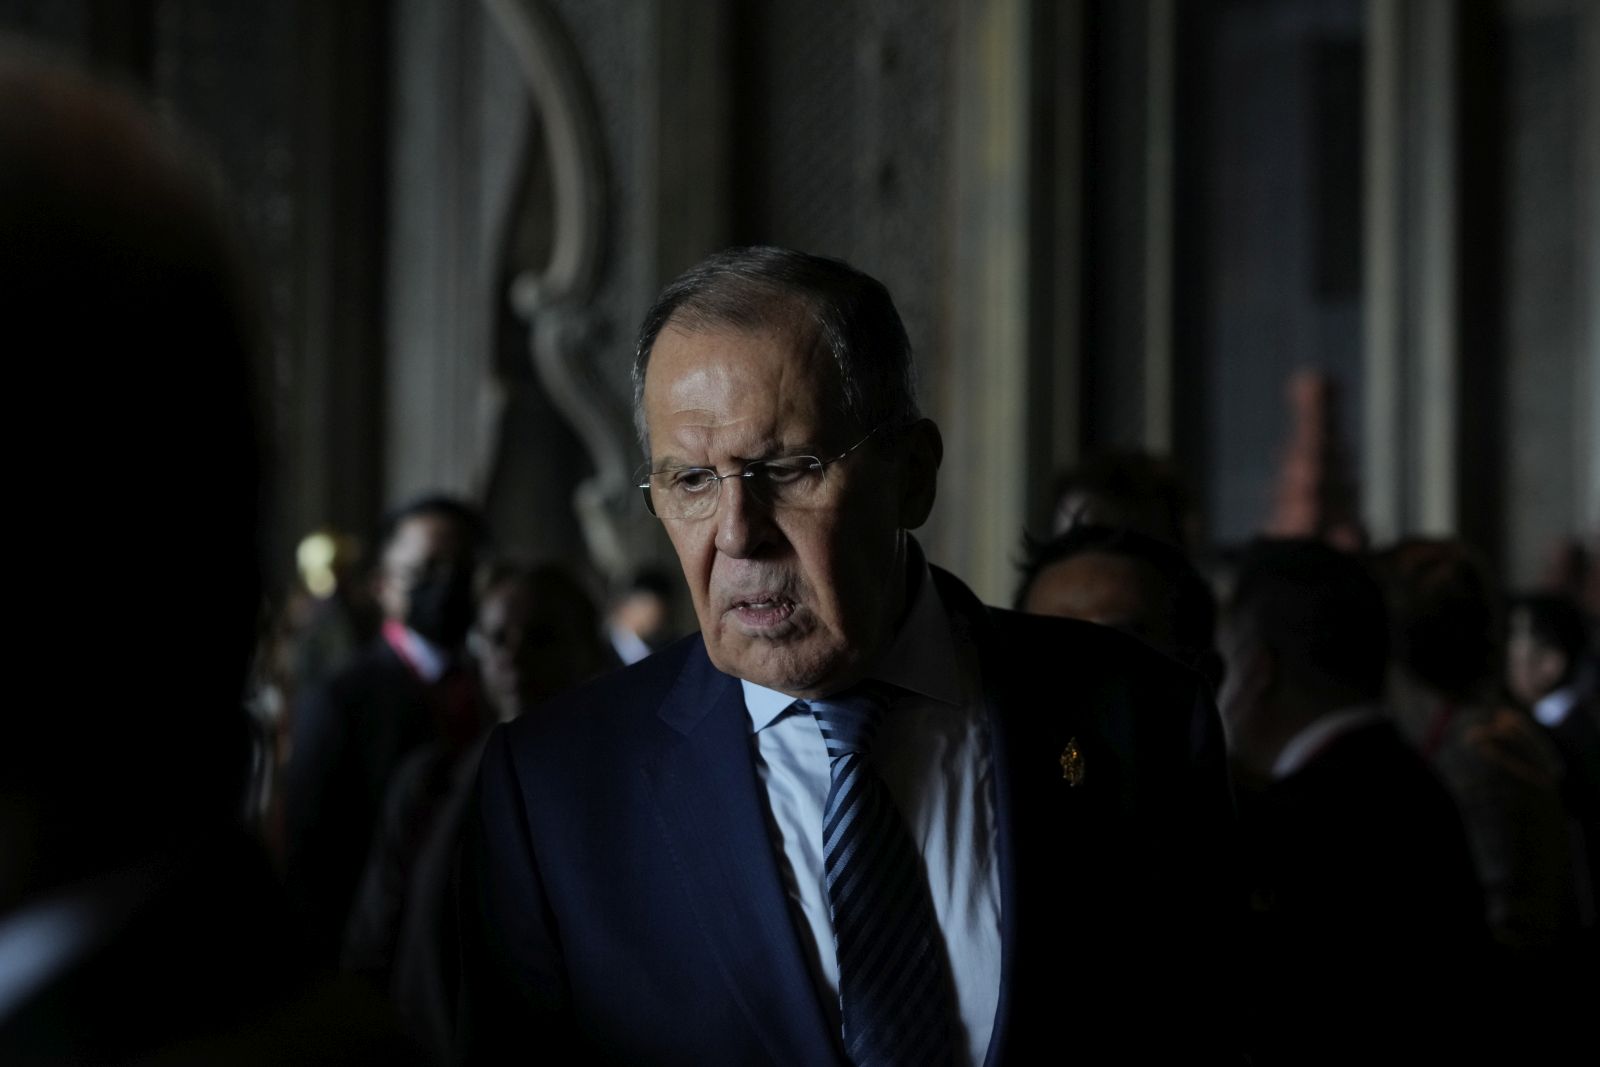 epa10306433 Russia's Foreign Minister Sergey Lavrov walks to attend a lunch as part of the G20 Leaders' Summit in Bali, Indonesia, 15 November 2022. The 17th Group of Twenty (G20) Heads of State and Government Summit runs from 15 to 16 November 2022.  EPA/ACHMAD IBRAHIM / POOL